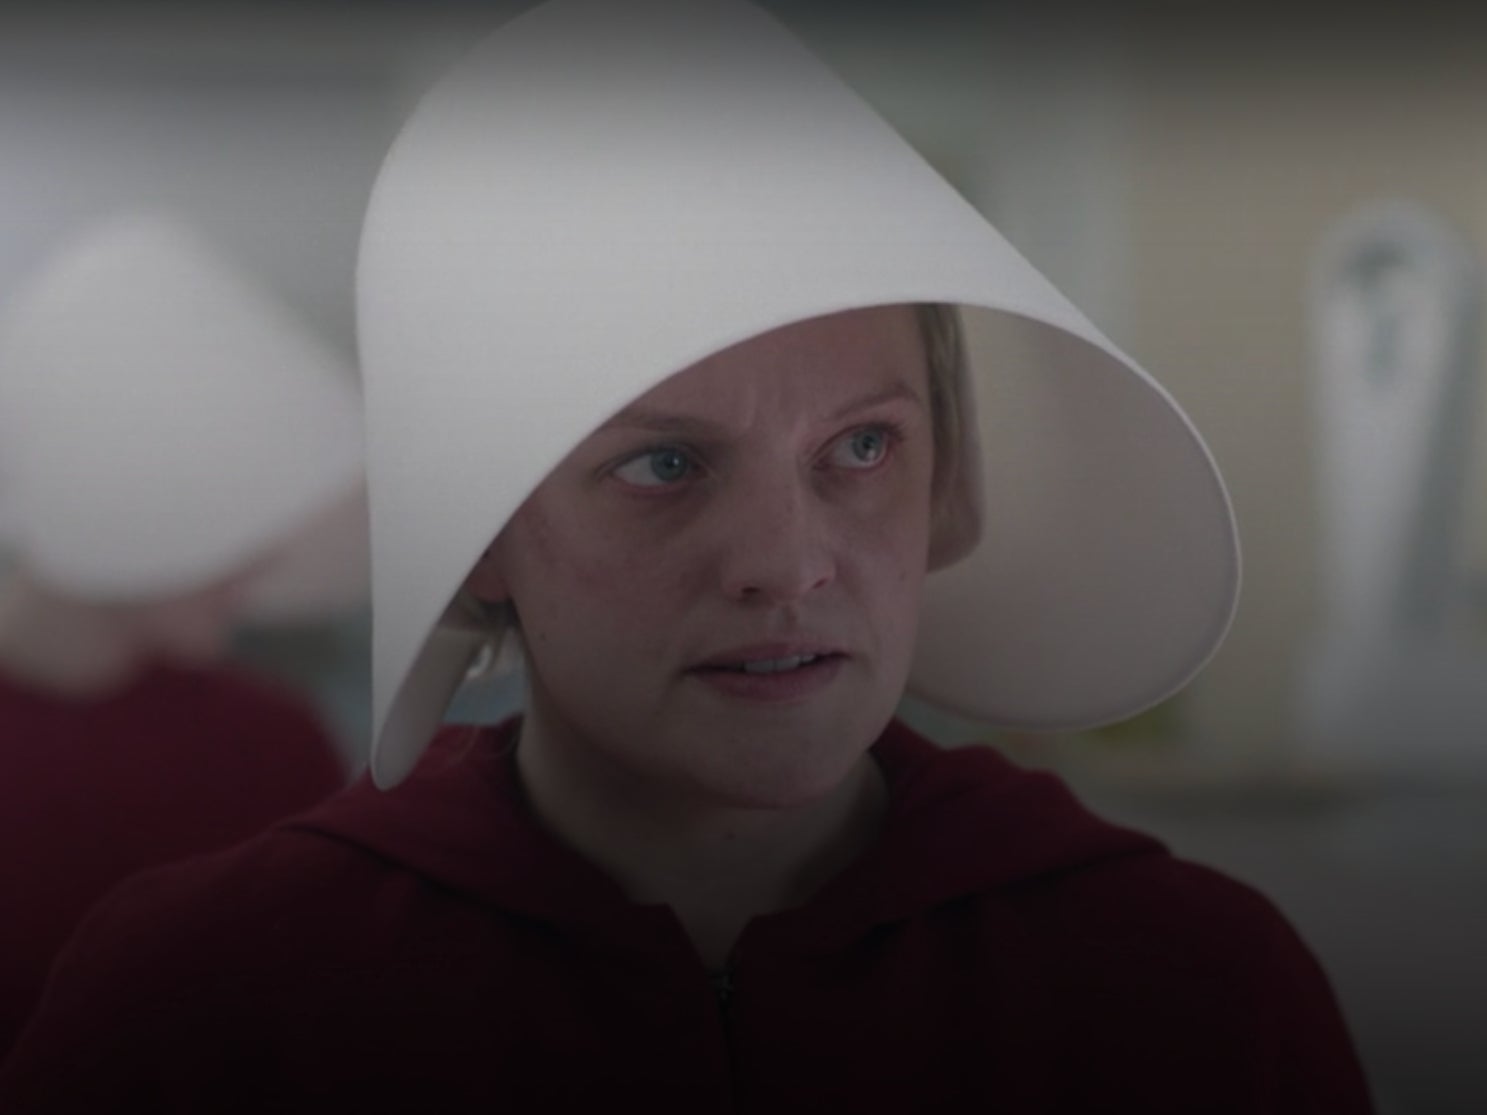 Will There Be A Season 5 Handmaid's Tale The Handmaid’s Tale season 5: Release date, cast and trailer